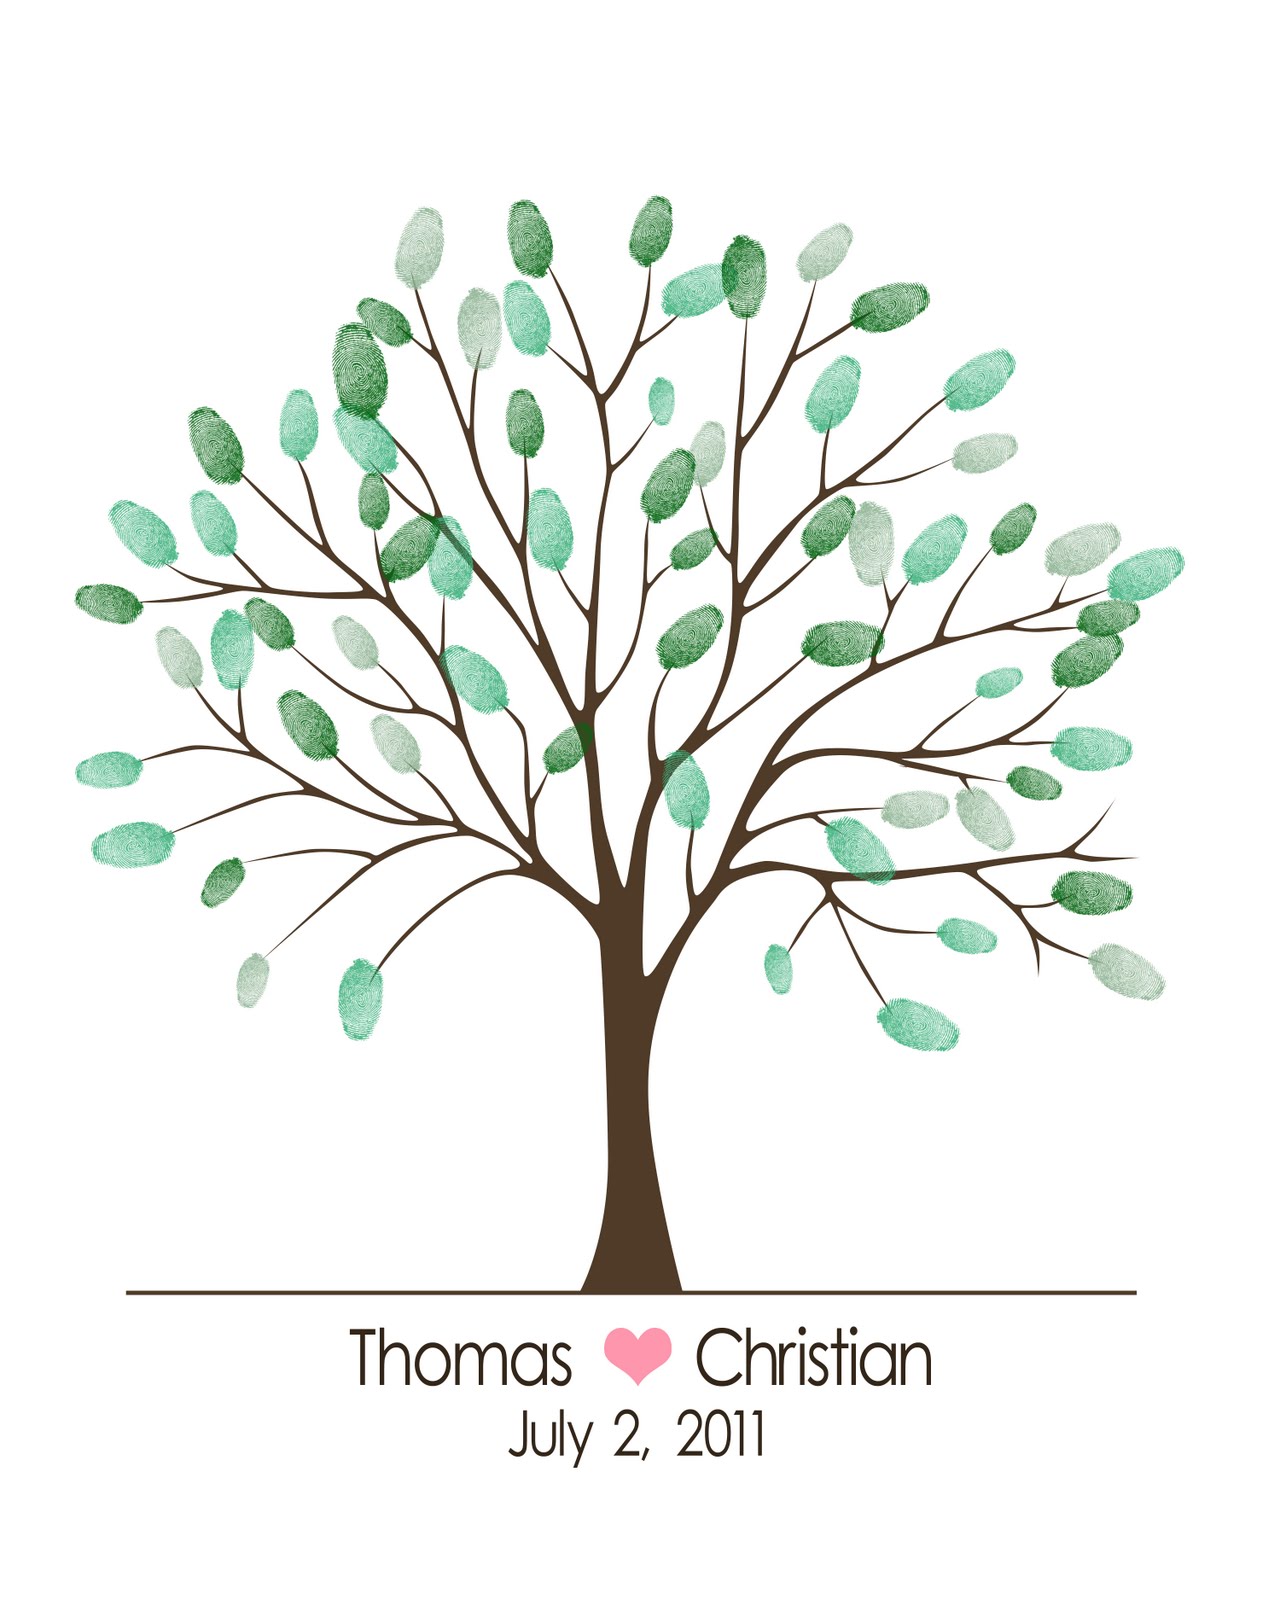 ... will be signing in on our thumbprint tree thomas created this tree